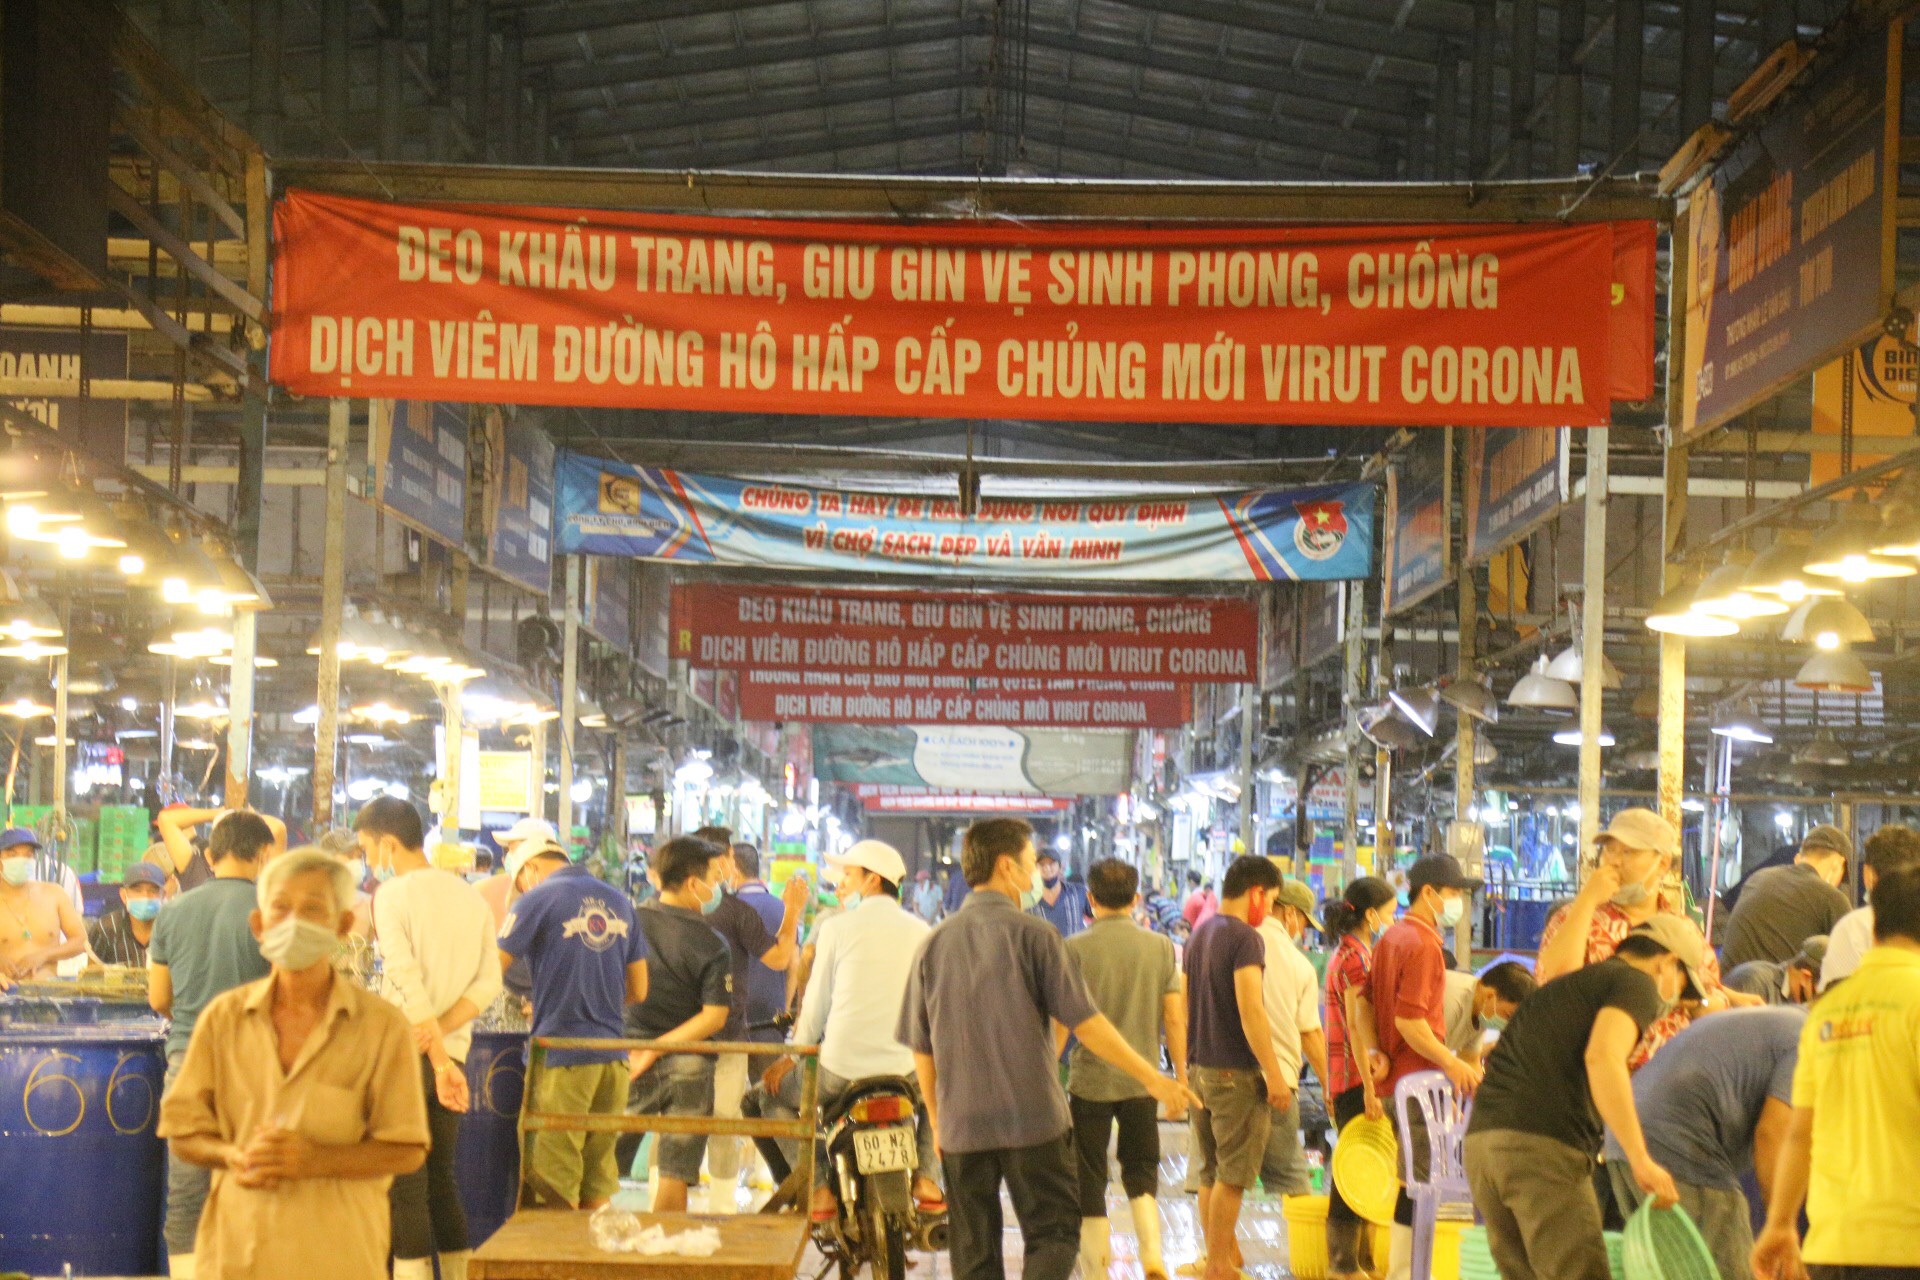 Back to Saigon to watch the bustling "sleepless market" in the middle of the Covid-19 season